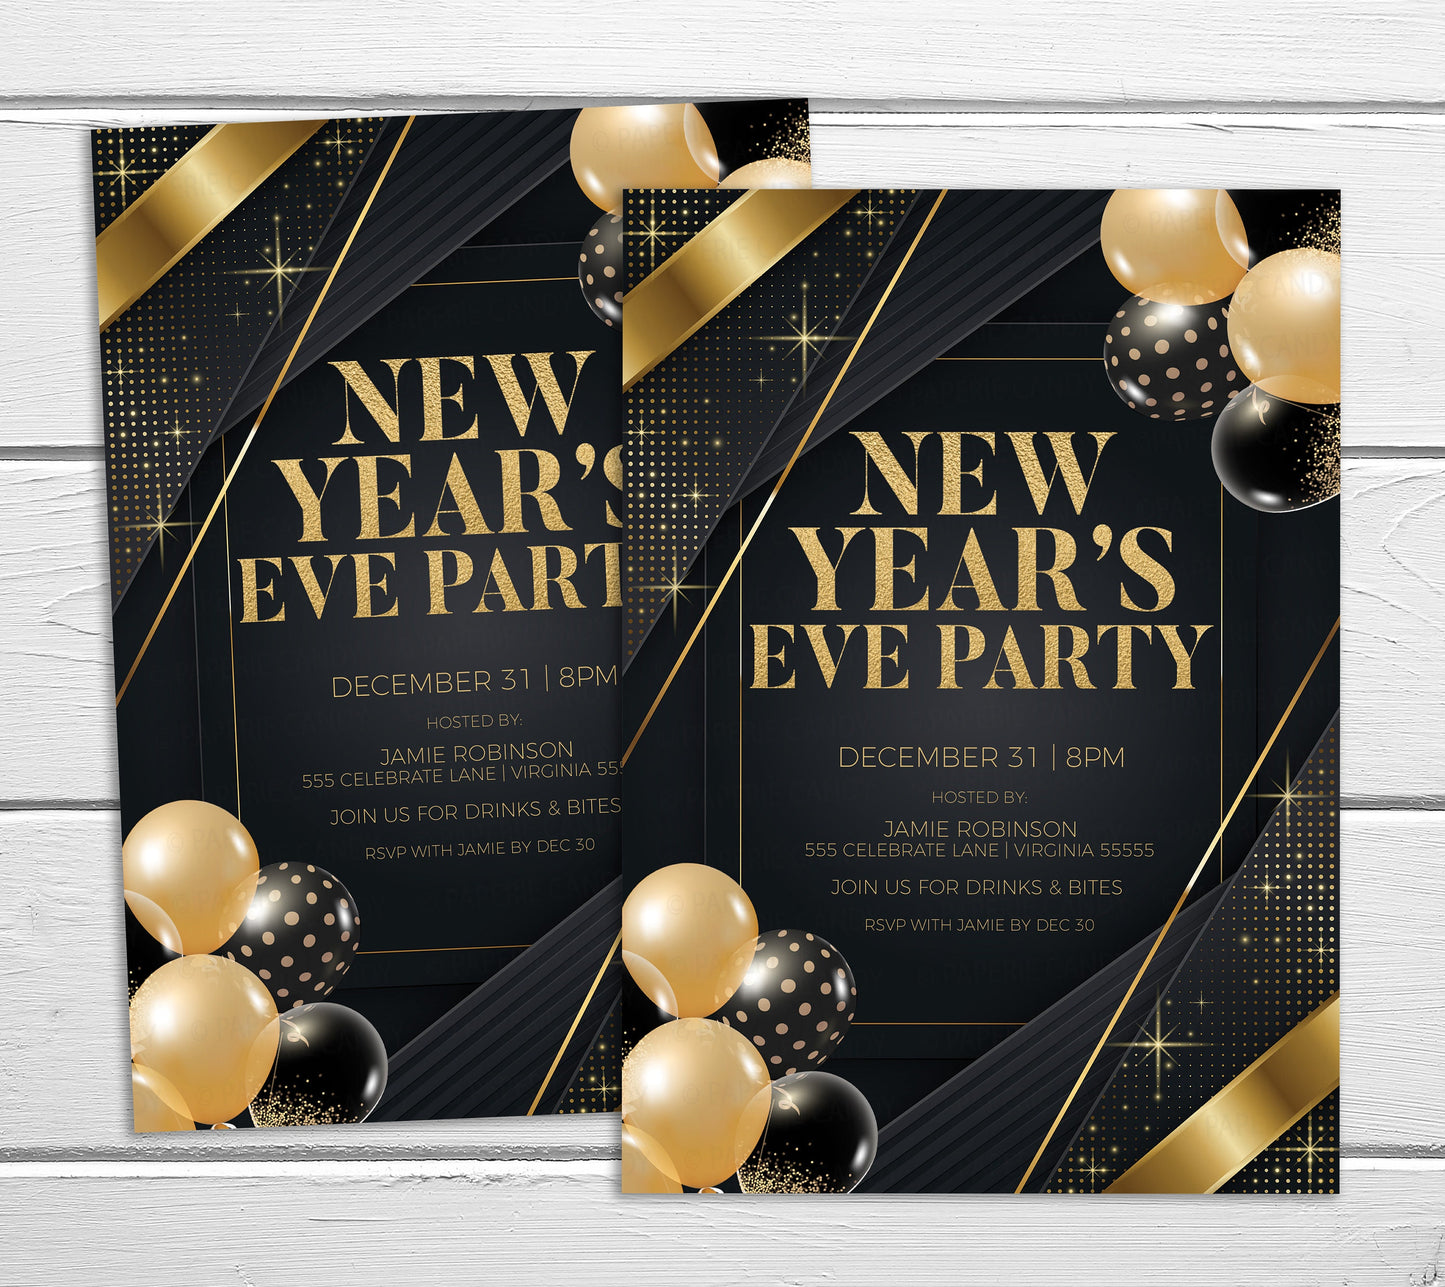 New Year's Eve Party Invitation, New Years Celebration Invite, Ball Drop Party, New Year Party, New Years Eve Dinner Drinks, Printable